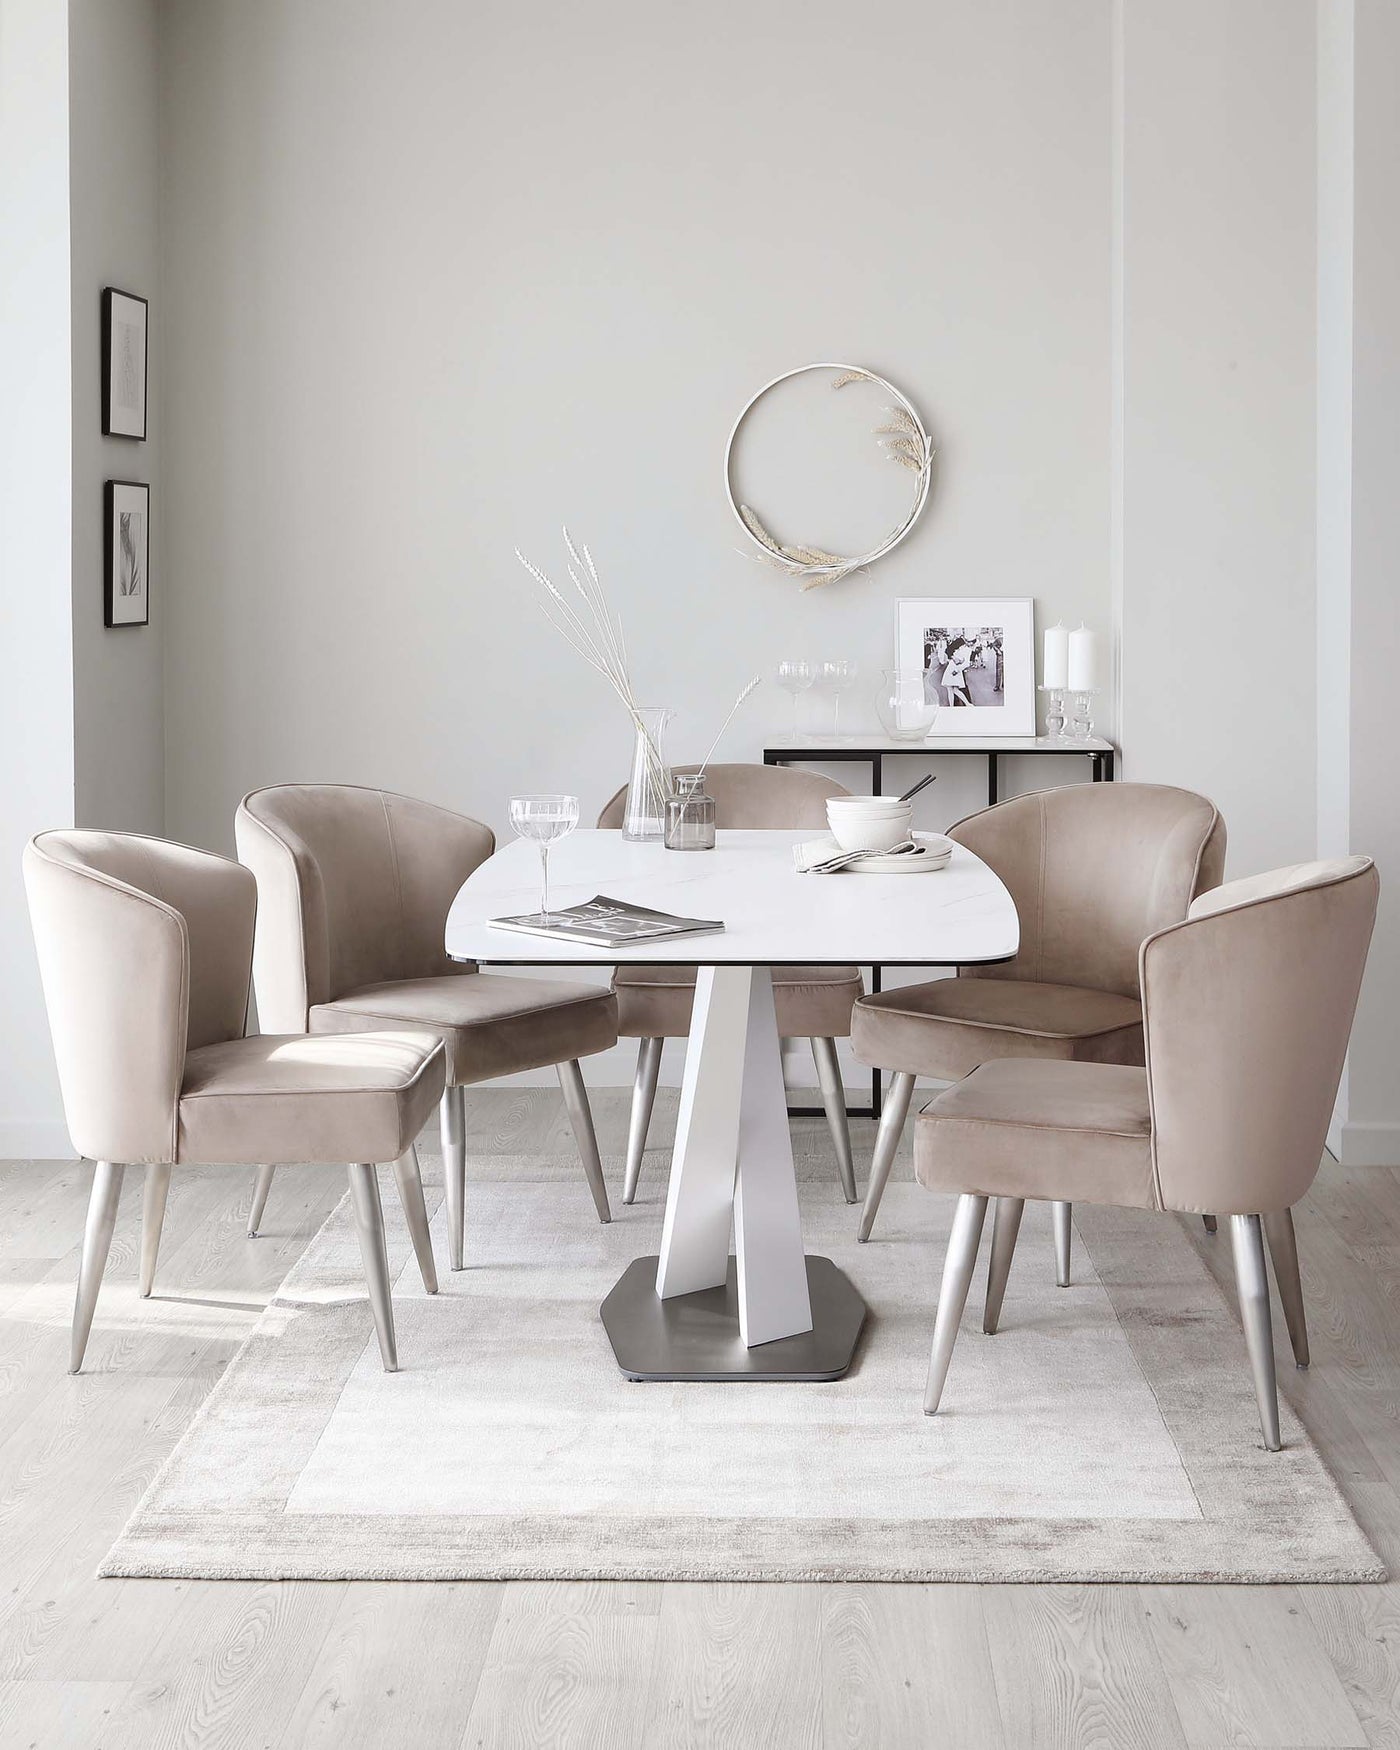 Modern dining room with a round white table featuring a geometric metallic base and a quartet of plush, taupe upholstered chairs with sleek tapered legs, set upon a textured light grey area rug.